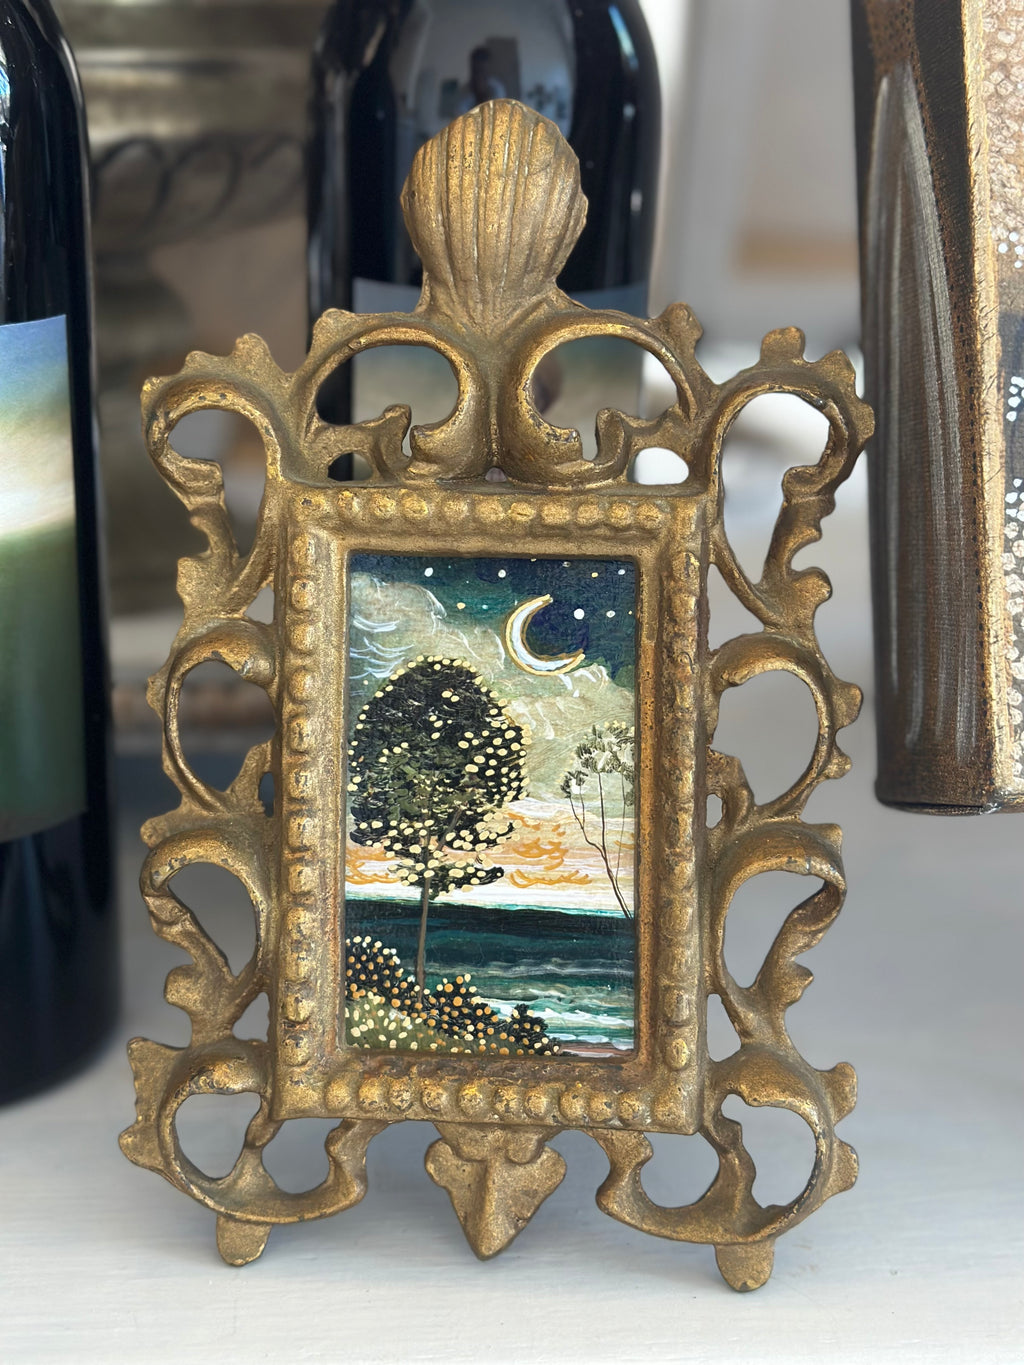 "Otherland's Crescent Moon" oil on paper, mounted in vintage Baroque metal frame